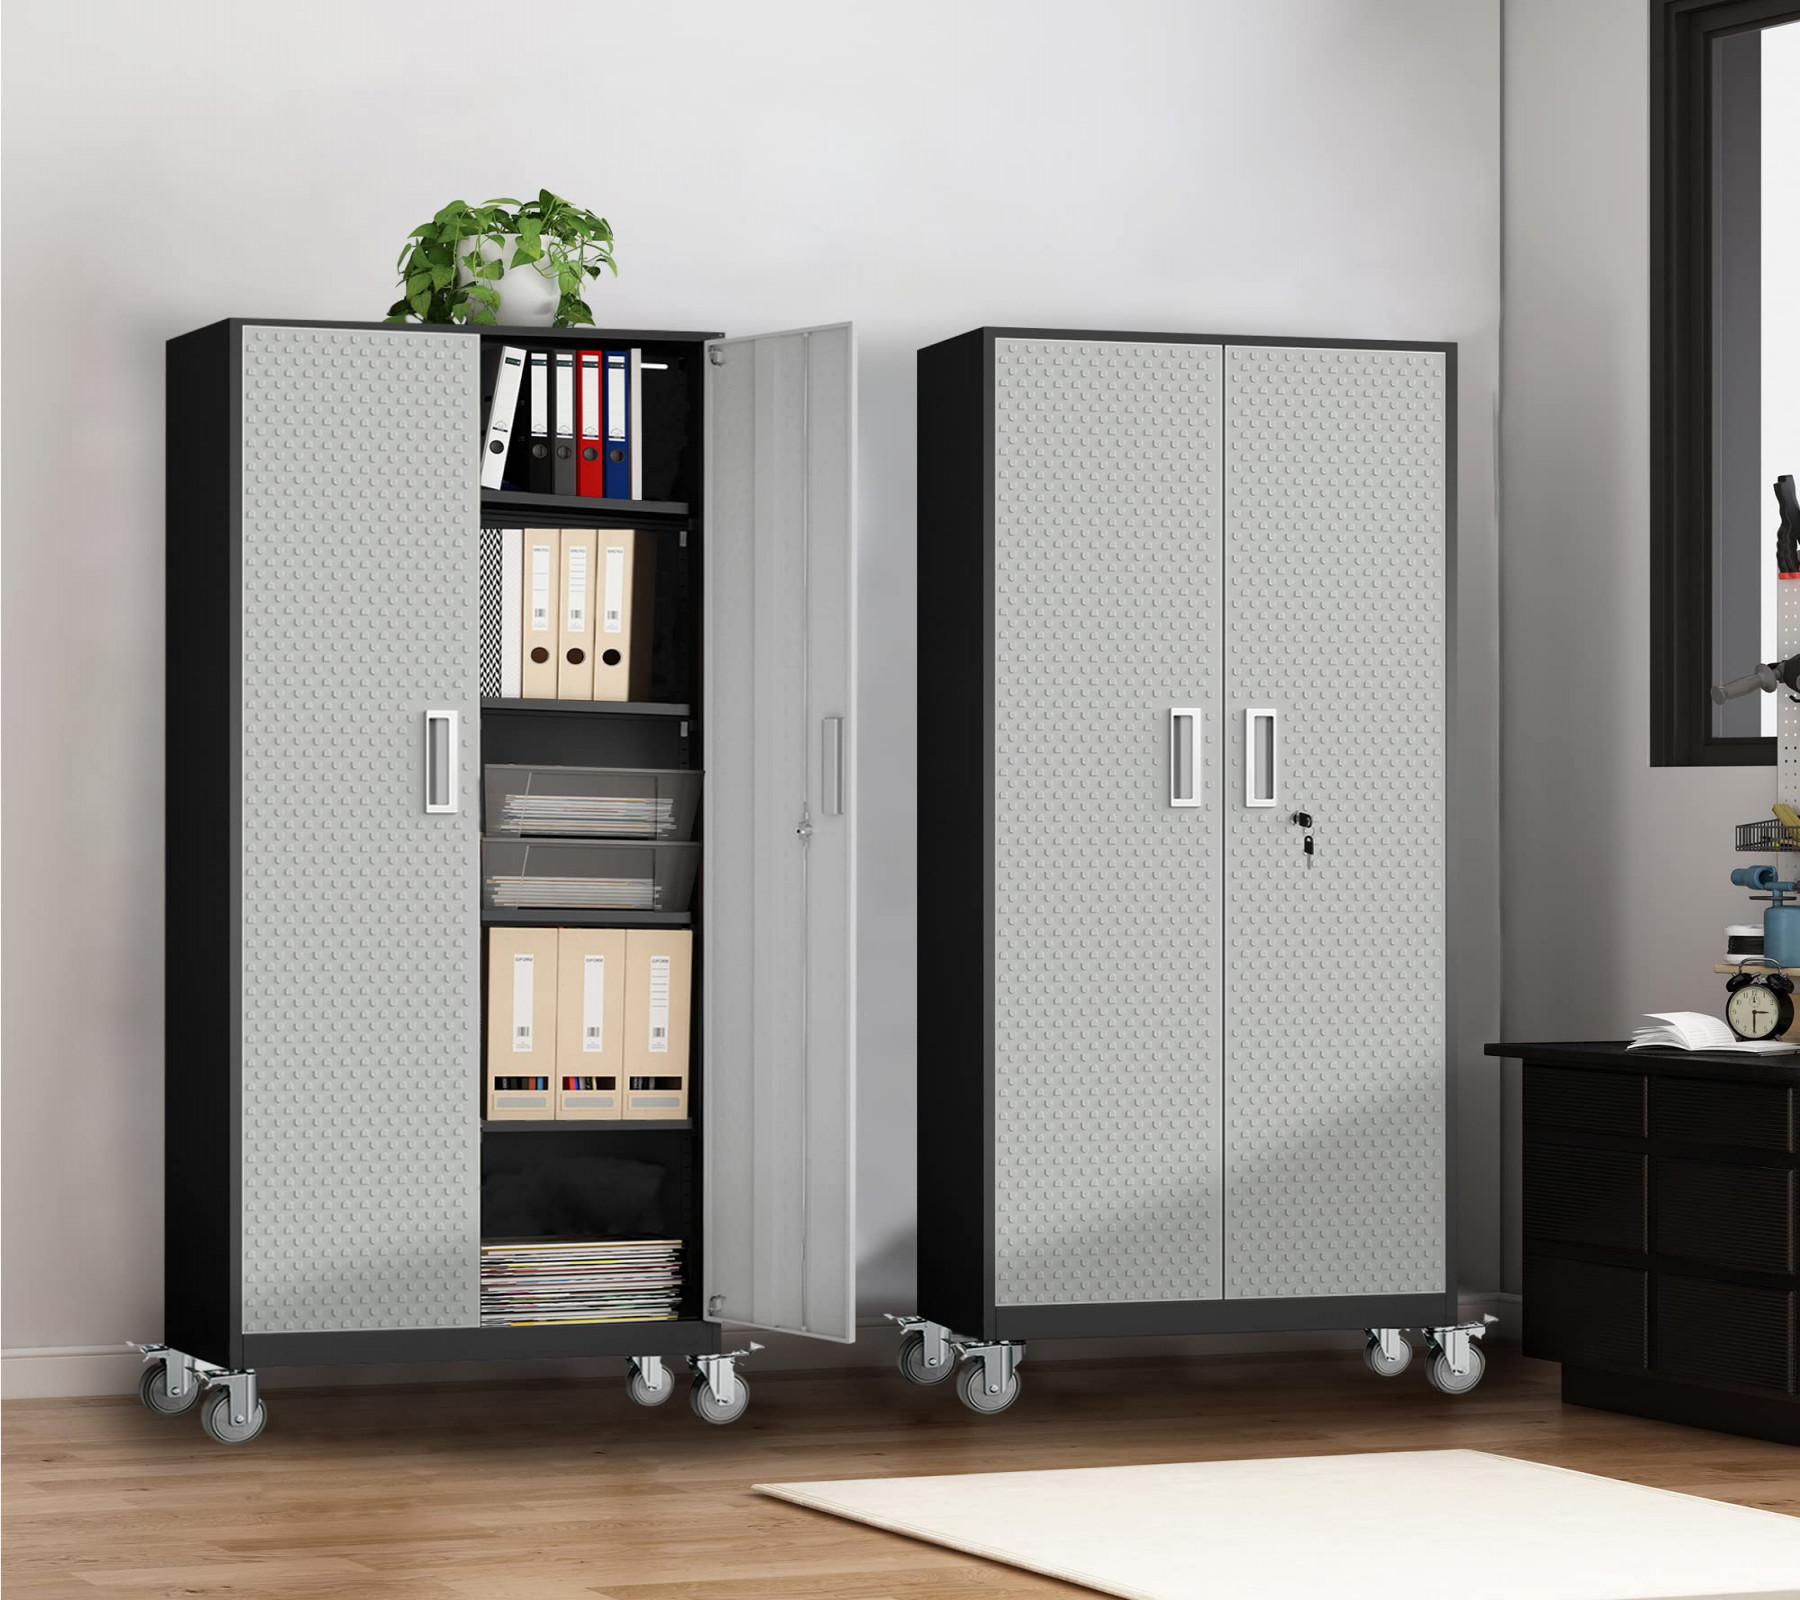 Tall Metal Garage Storage Cabinet, " Tool Storage Cabinet Utility Locker  with Wheels, Adjustable Shelves & Locking Doors- Pantry Cabinets for